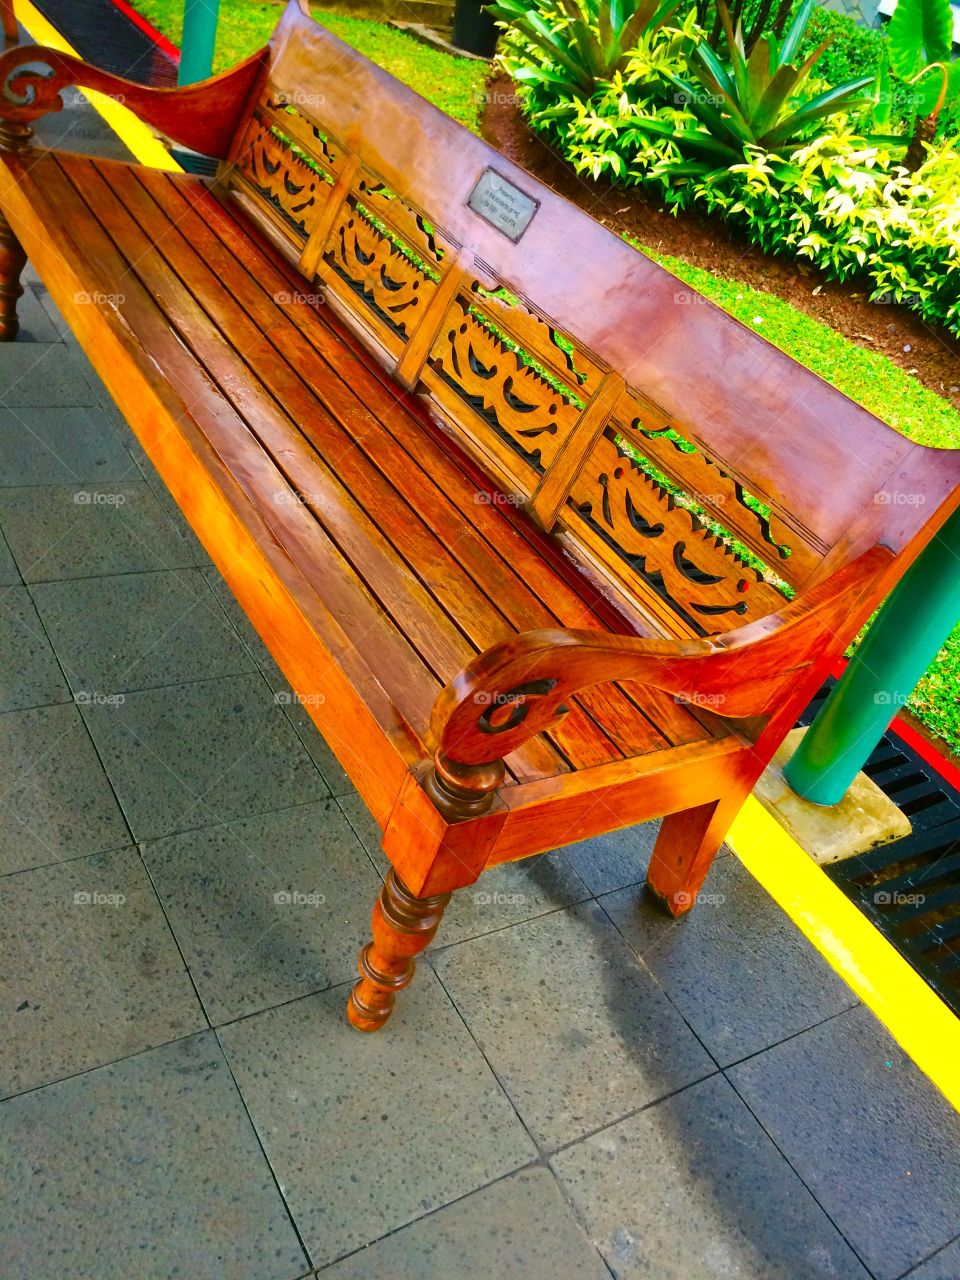 A park without benches is like an uninhabited forest. As small as the size of a park bench, this one equipment becomes important and must be in your home garden.

No need to be fancy and expensive, 4,Nov,2019. Jakarta city indonesia